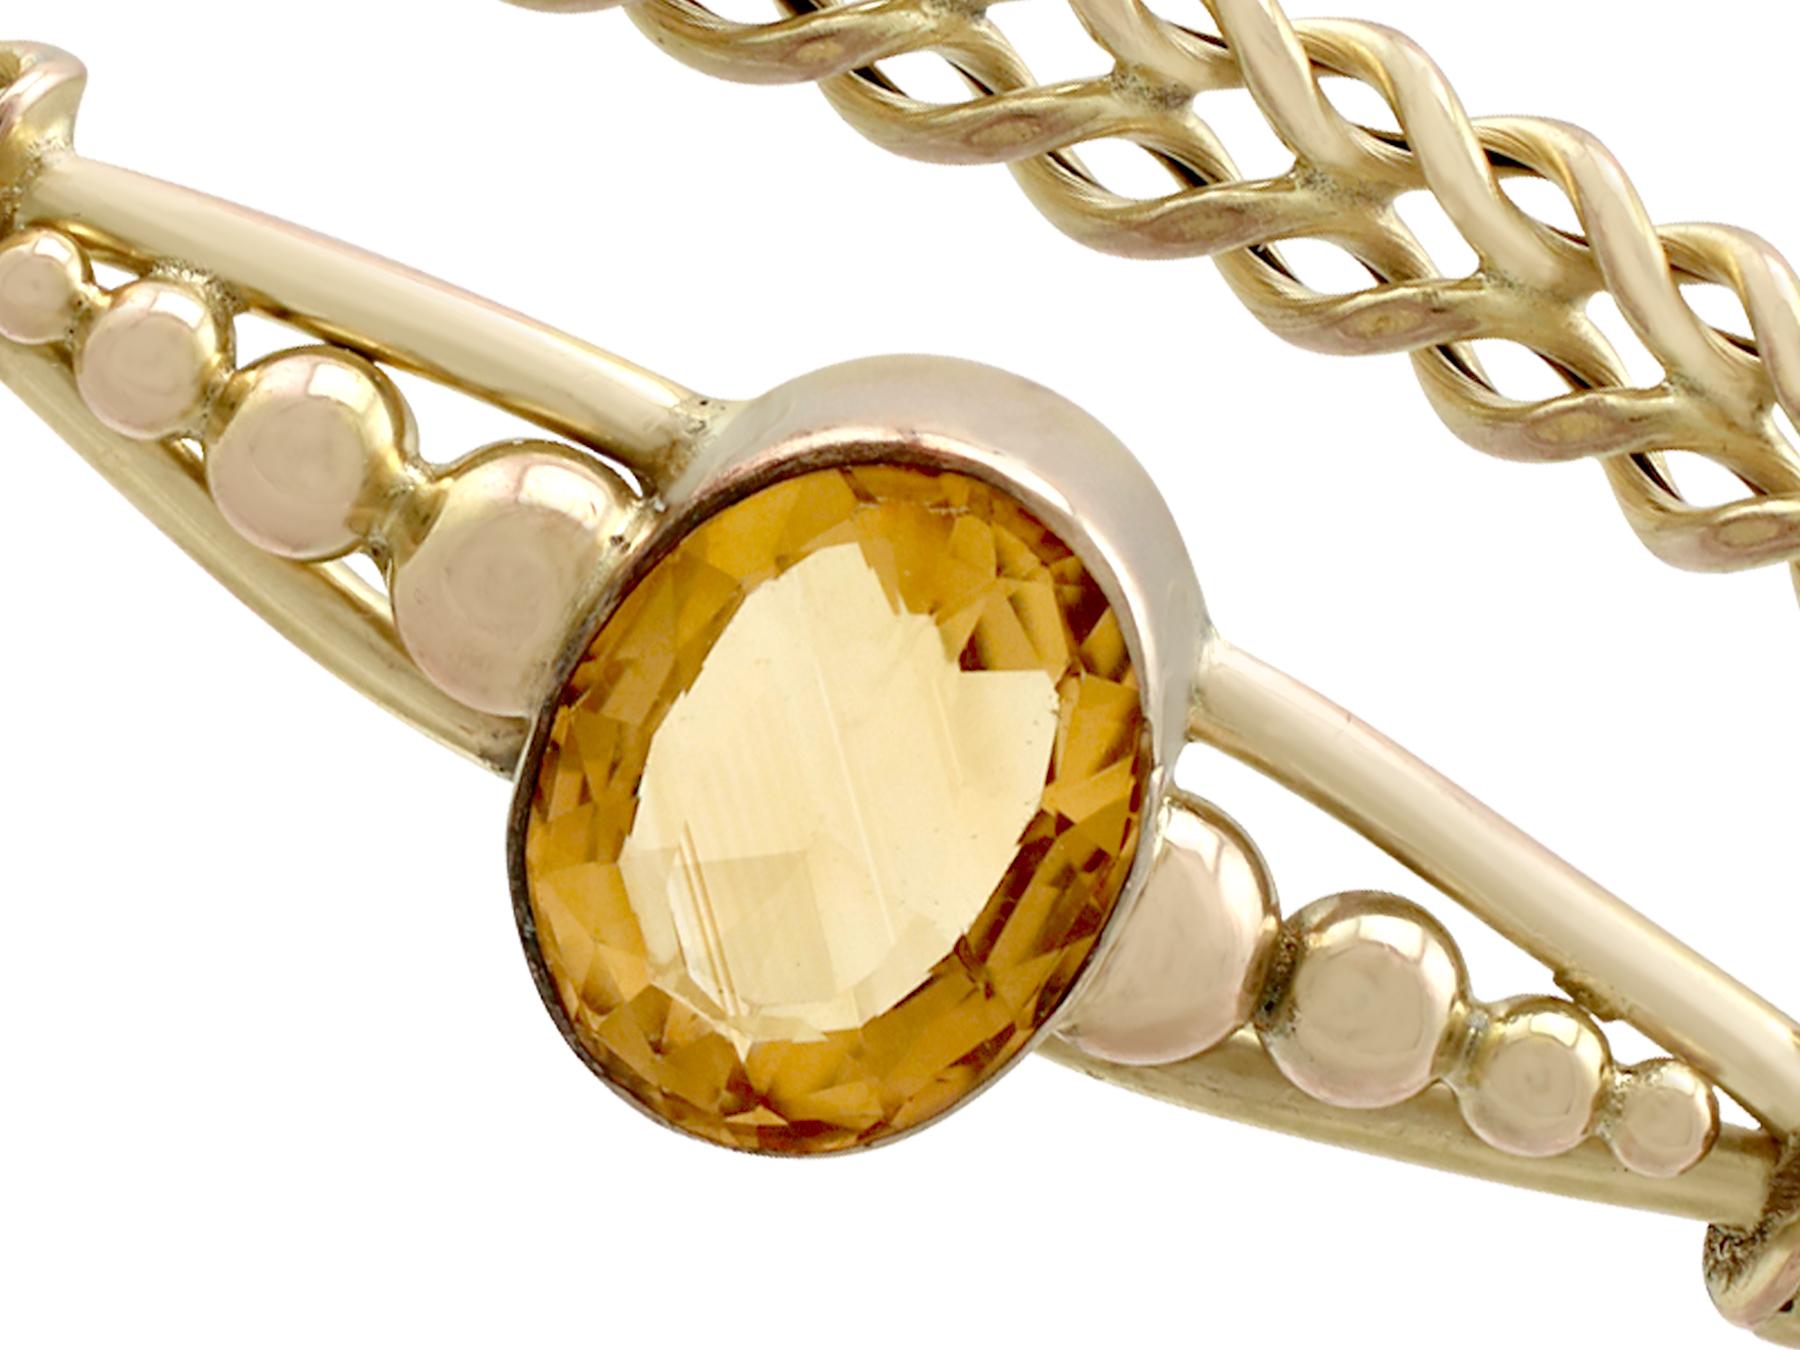 An impressive antique Victorian 5.05 carat citrine and 9 karat yellow gold bangle; part of our diverse antique jewelry and estate jewelry collections.

This fine and impressive antique bangle has been crafted in 9k yellow gold.

The anterior face of